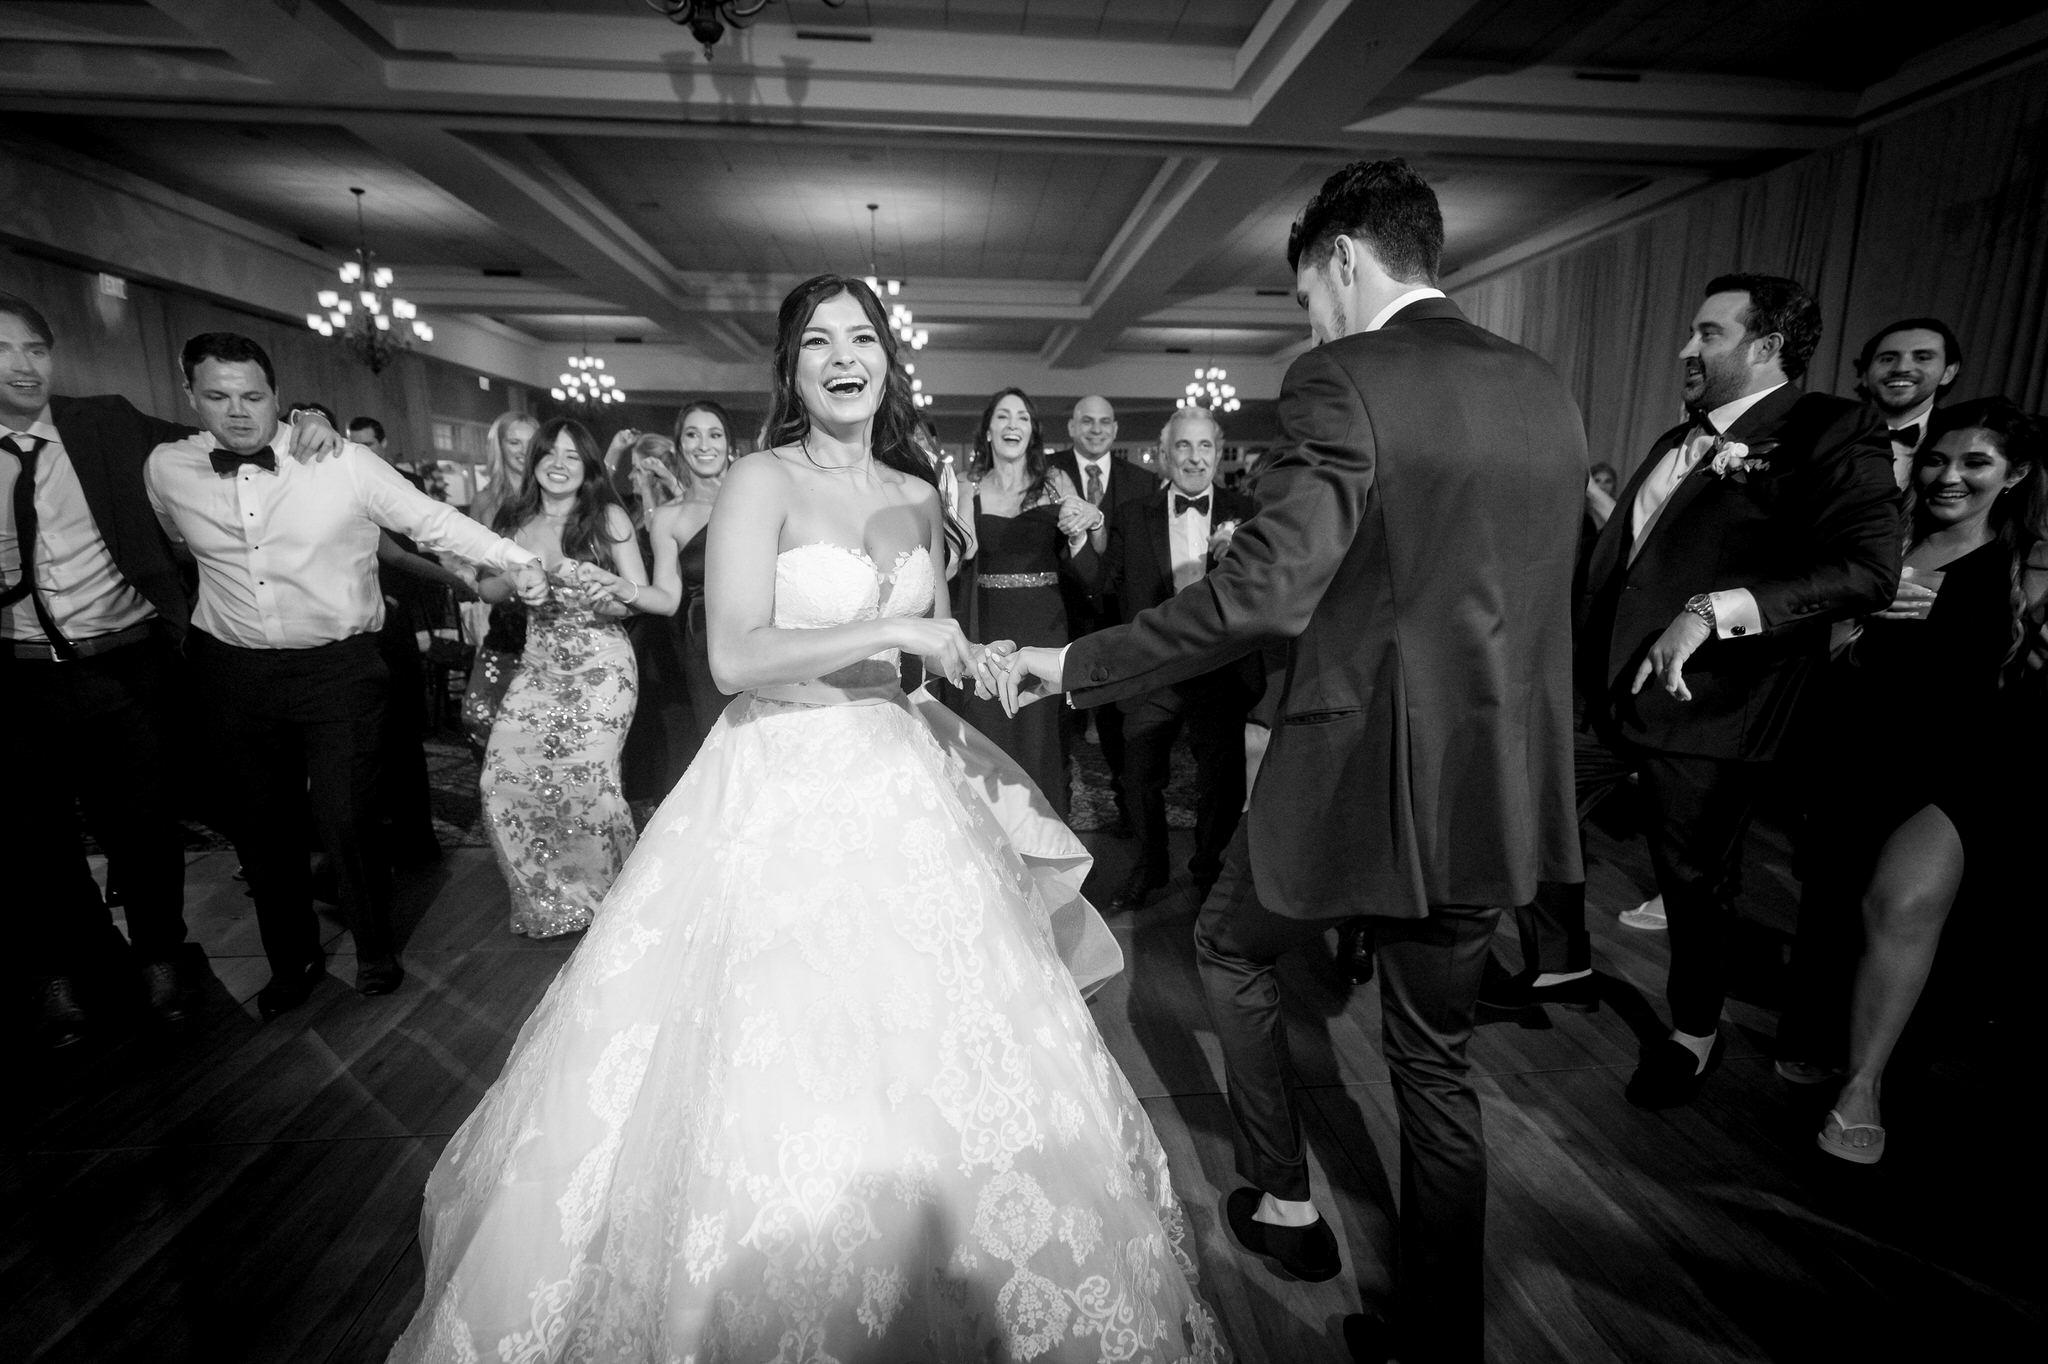 A bride and groom dance while surrounded by family at their wedding at Bay Harbor.  